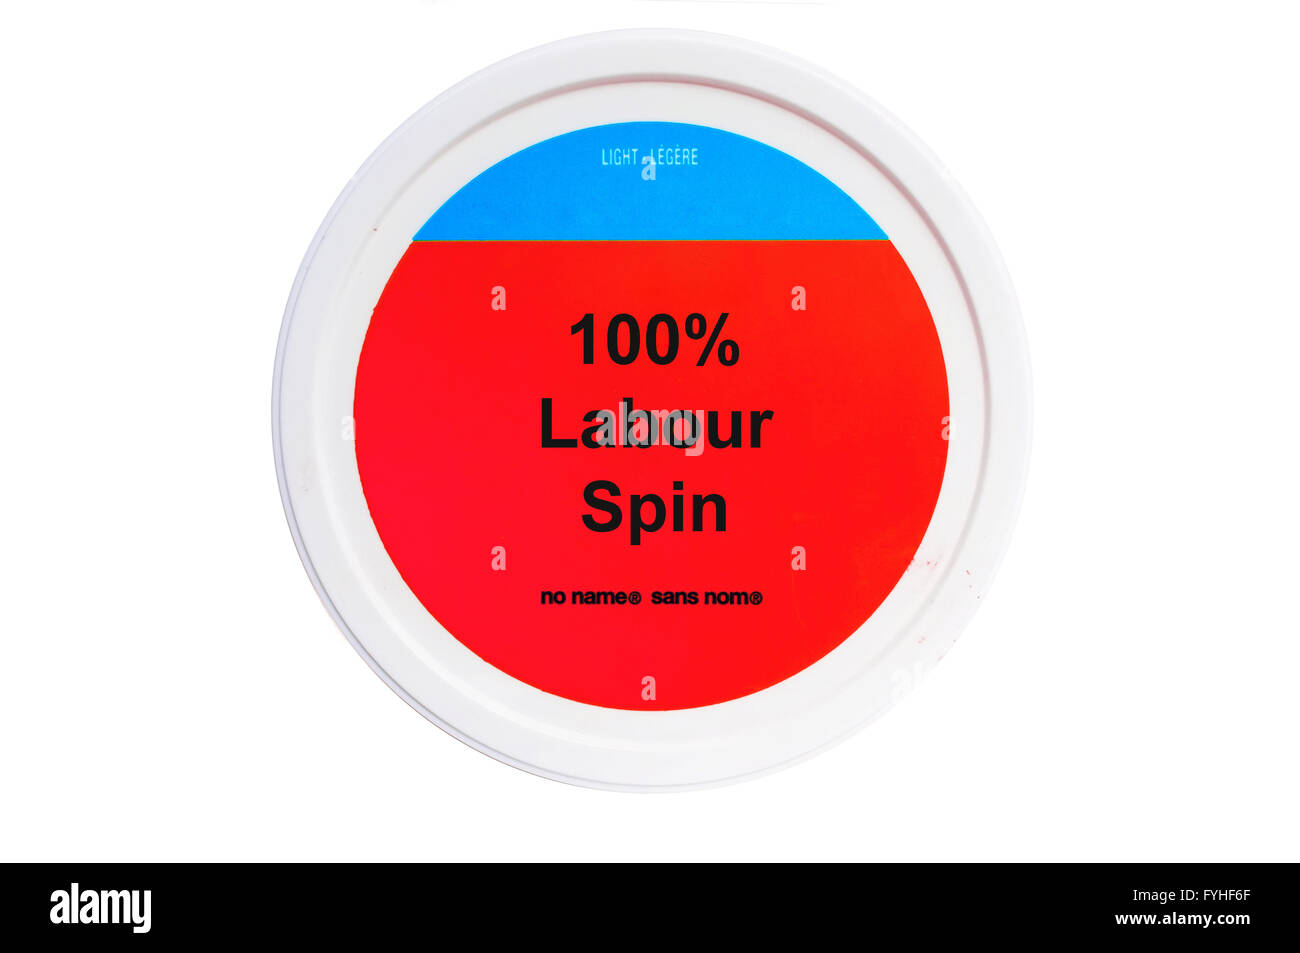 A tub with 100% Labour Spin written on the label photographed against a white background. Stock Photo